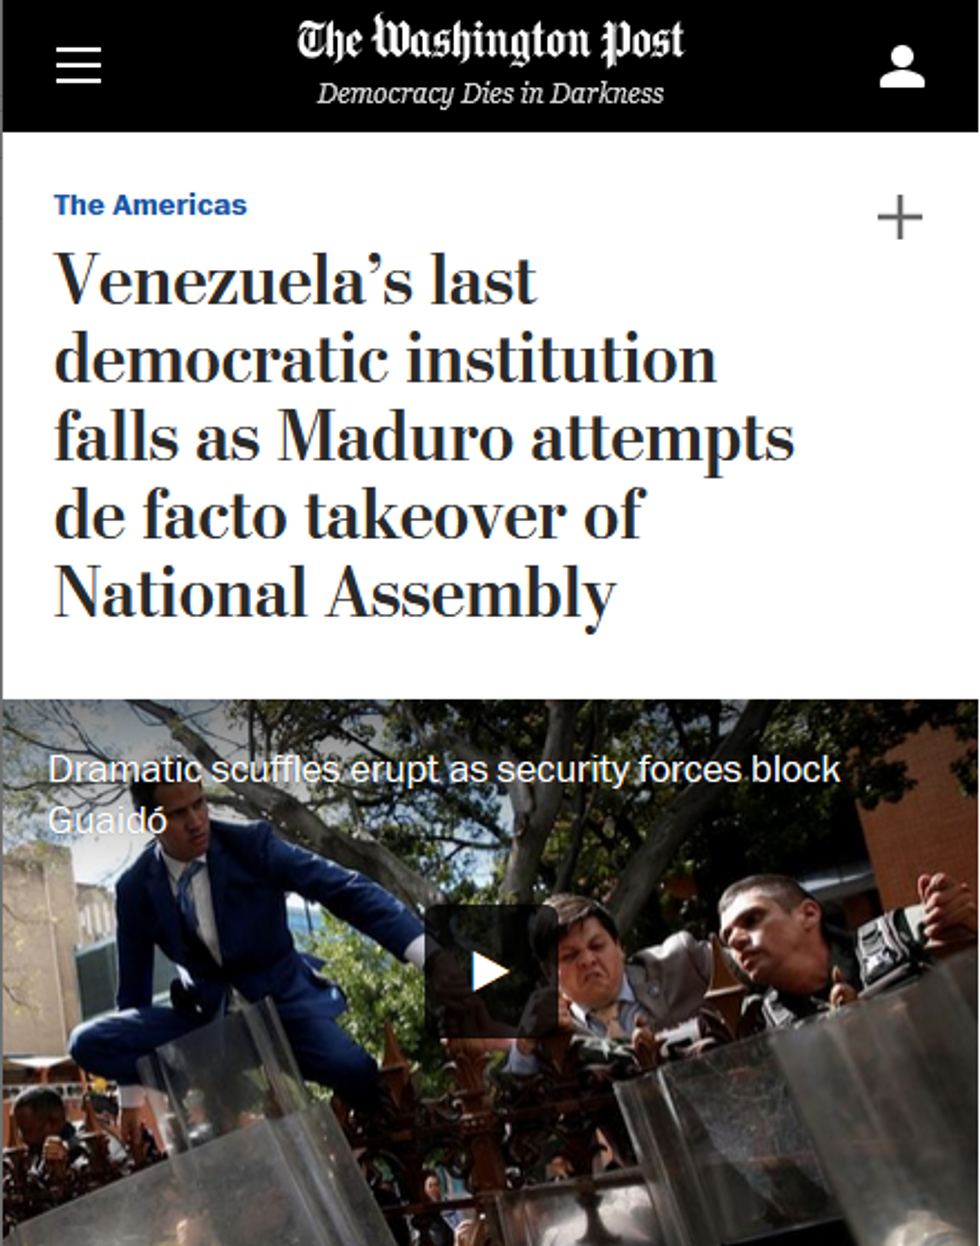 The Washington Post (1/5/20) described Venezuelan lawmakers voting against someone other than Washington's chosen candidate to head the assembly as